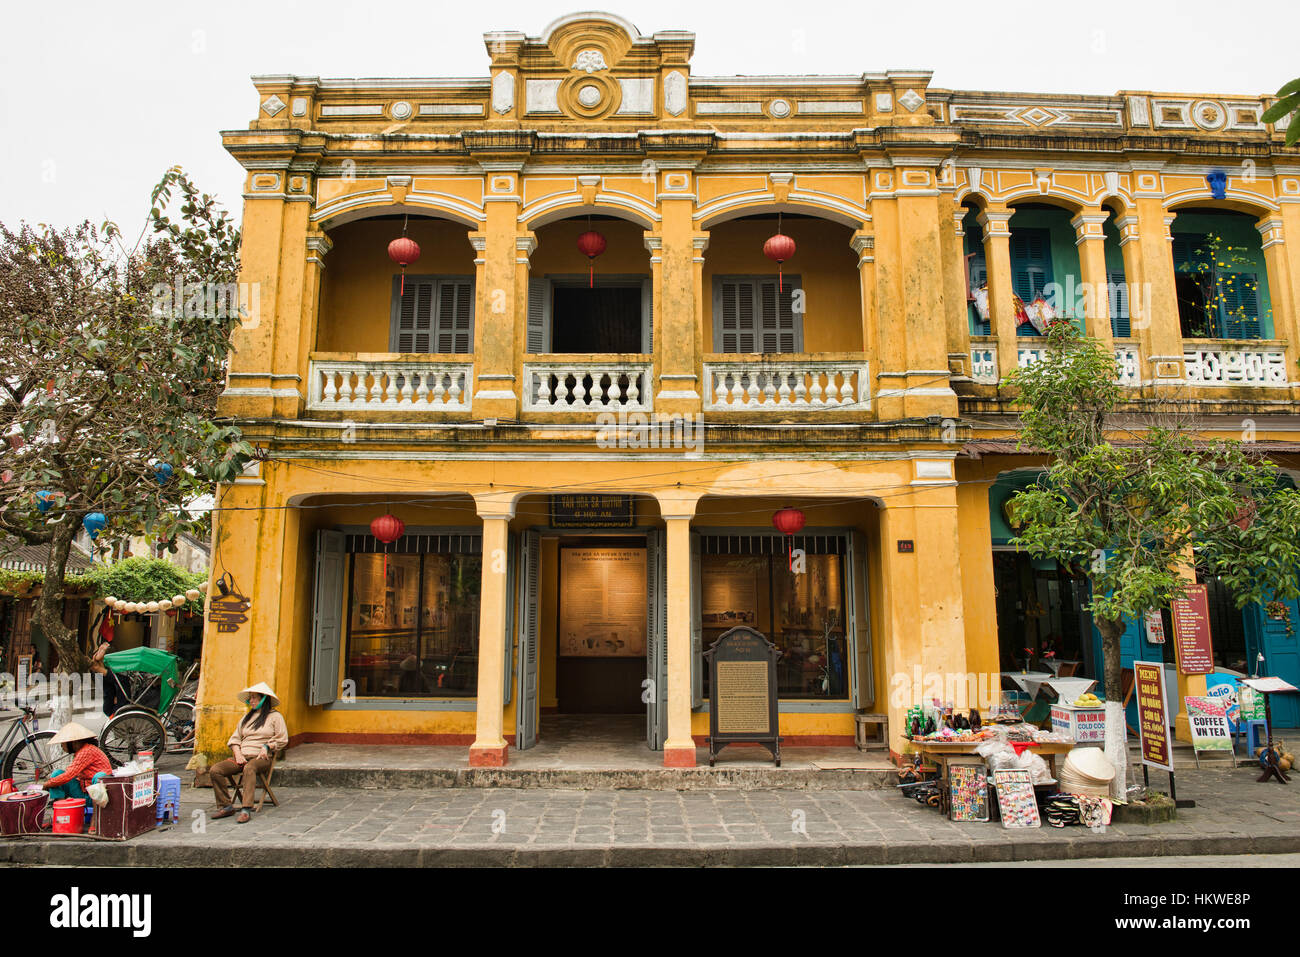 Colonial architecture in the picturesque old town of Hoi An, Vietnam Stock Photo